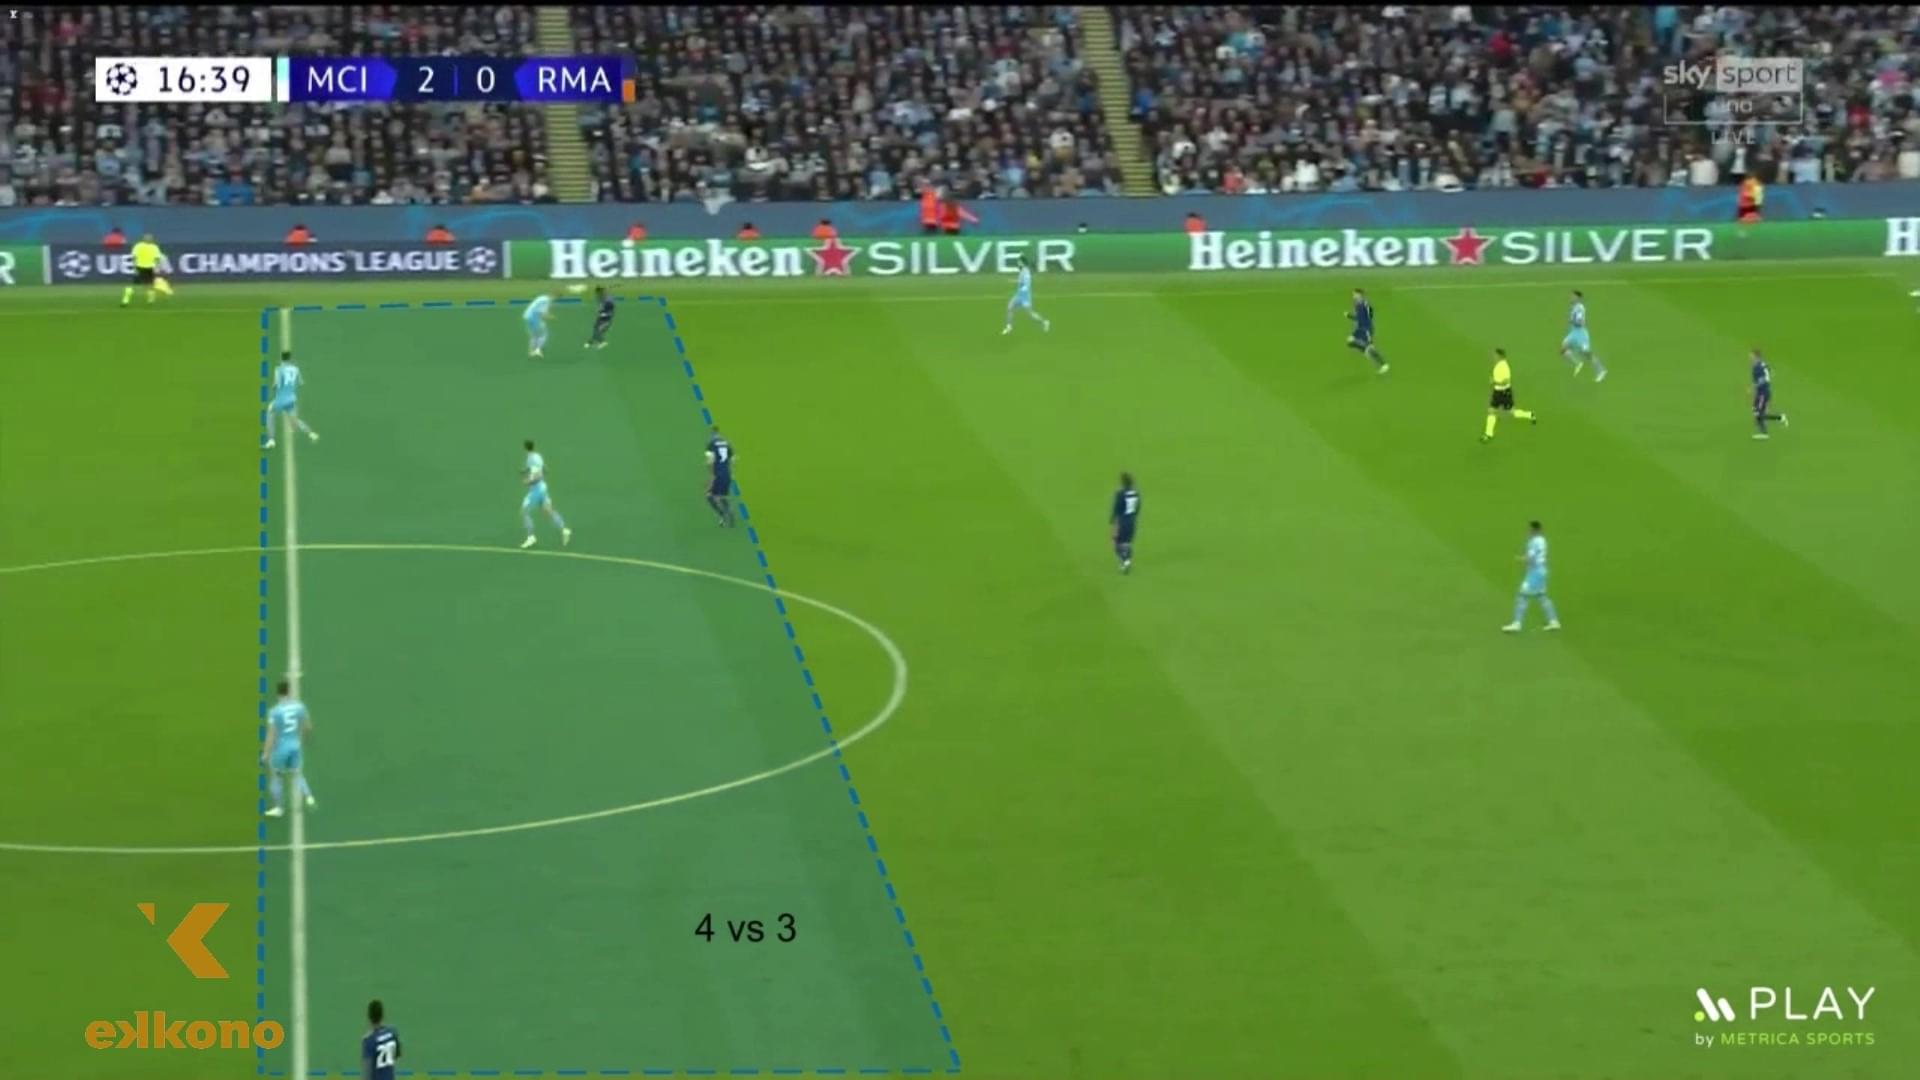 caption of a match between MCI and RMA, focusing on the midfielders area